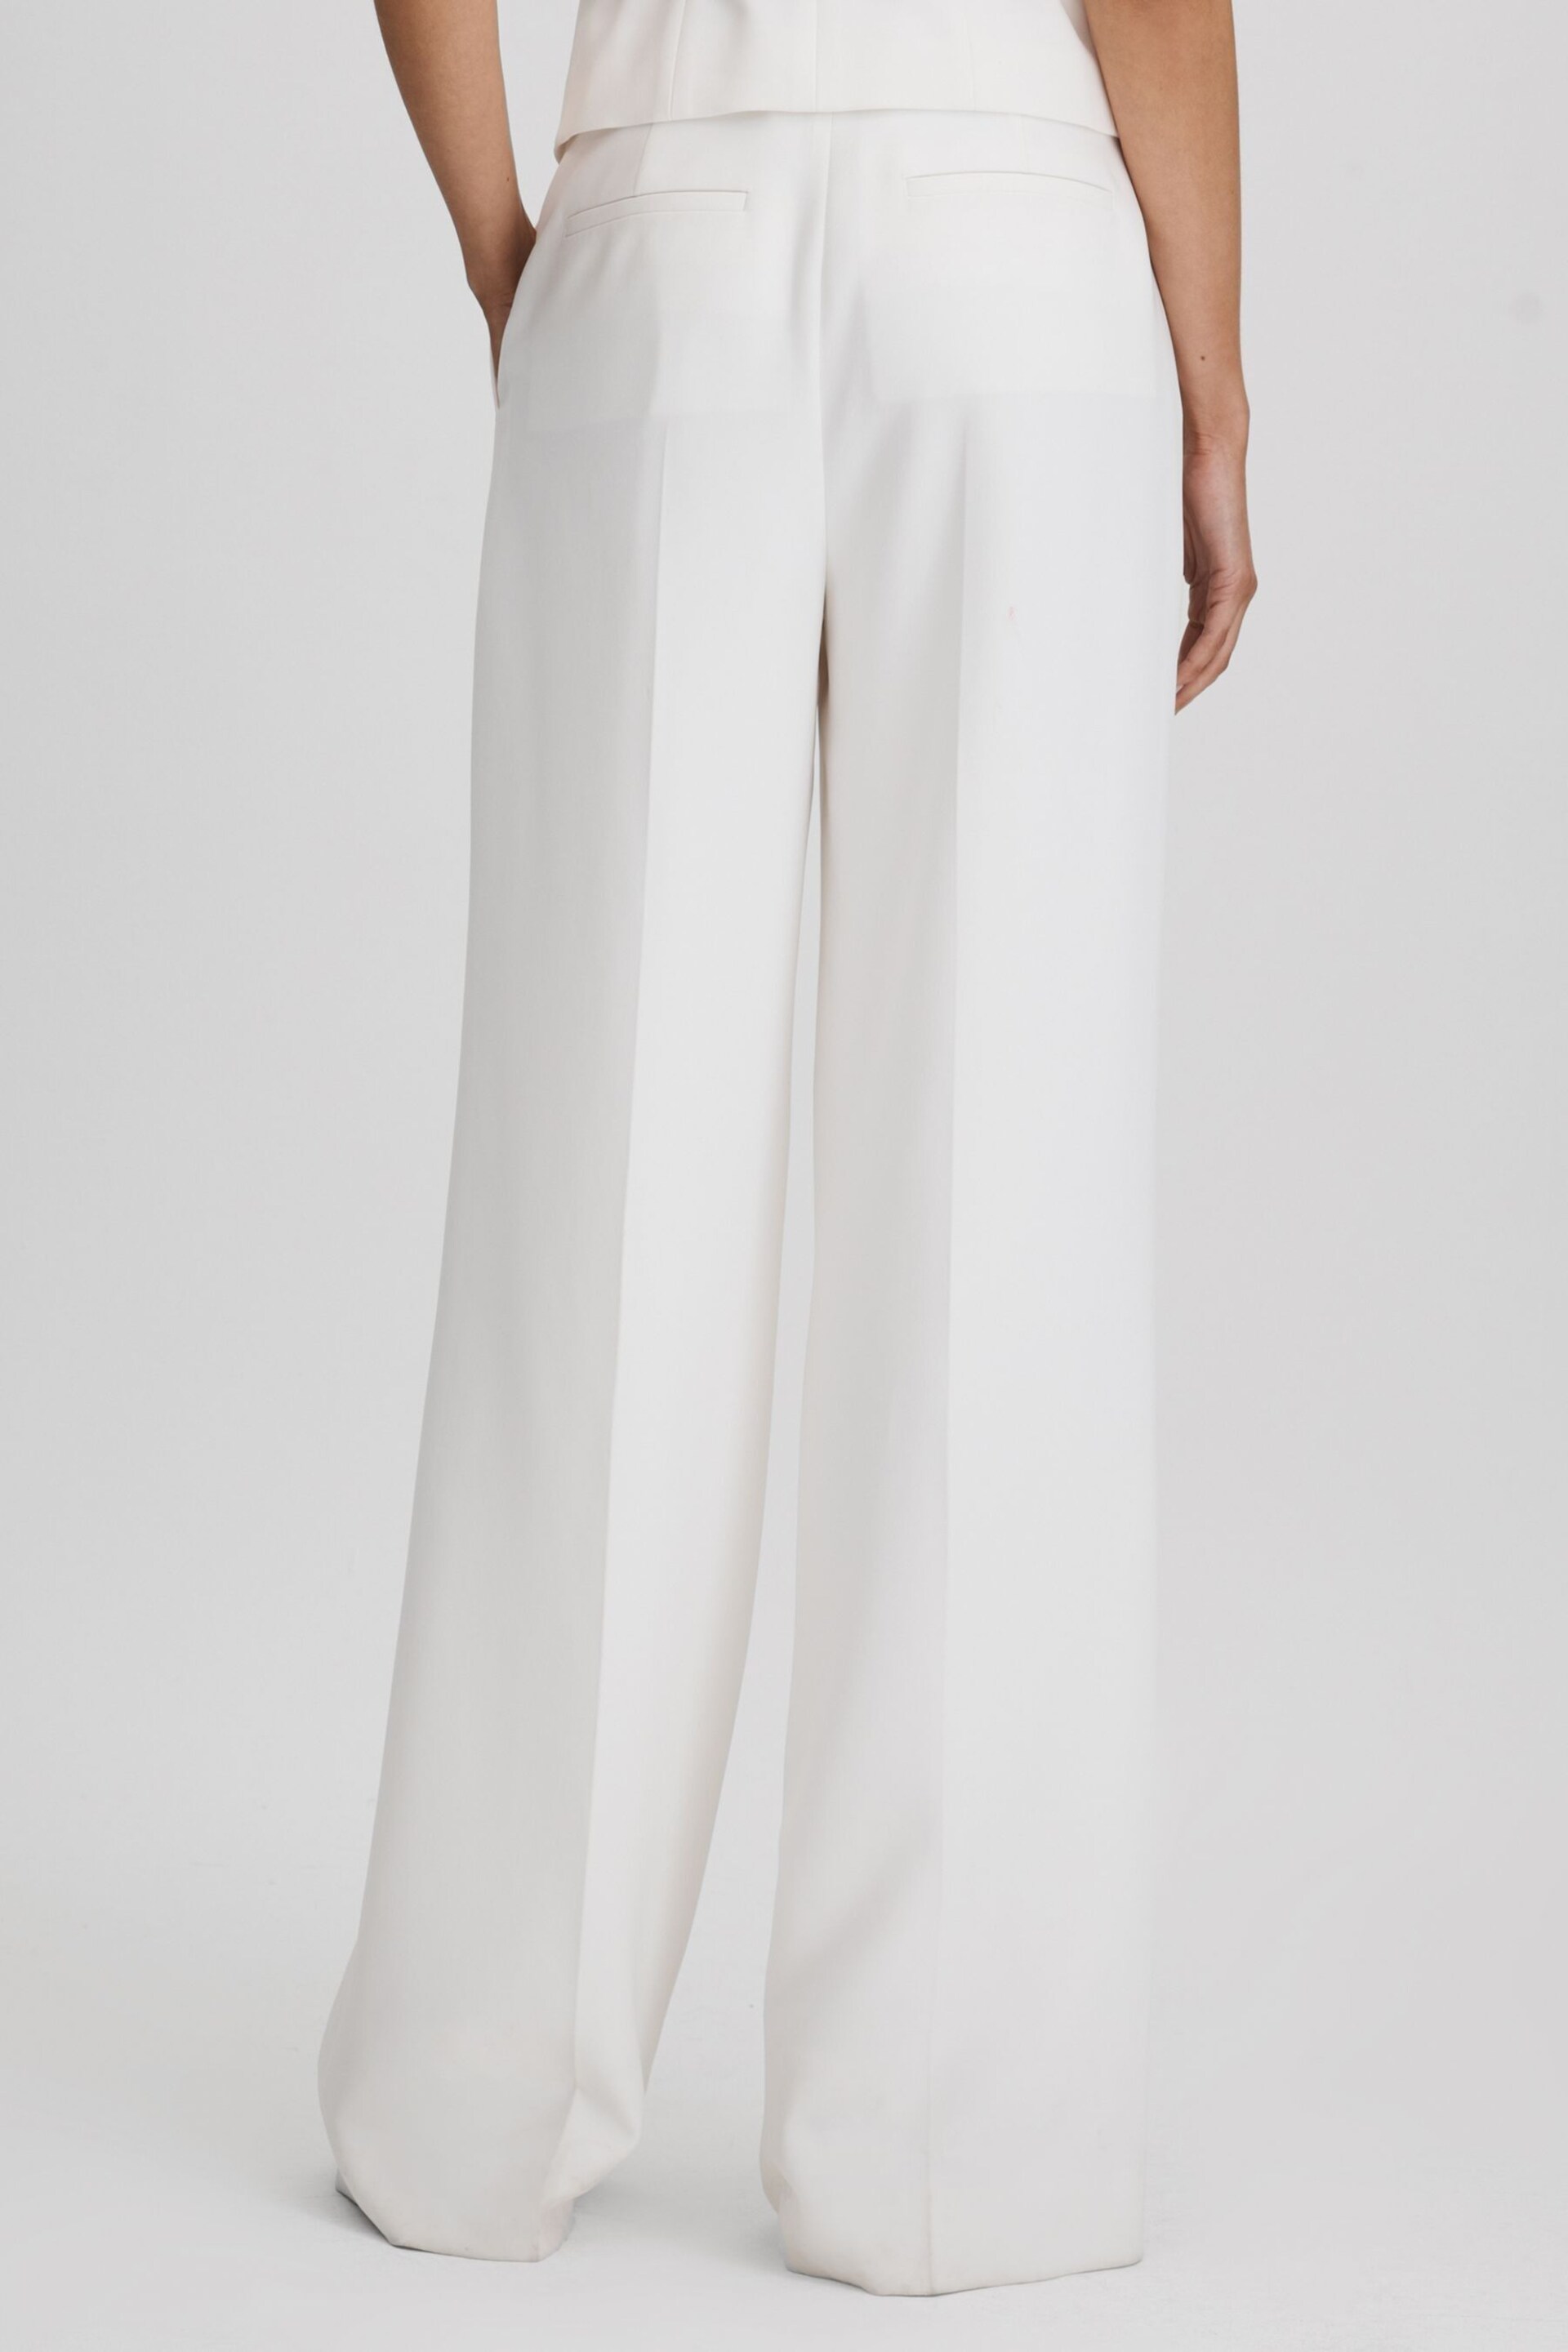 Reiss White Sienna Crepe Wide Leg Suit Trousers - Image 6 of 7